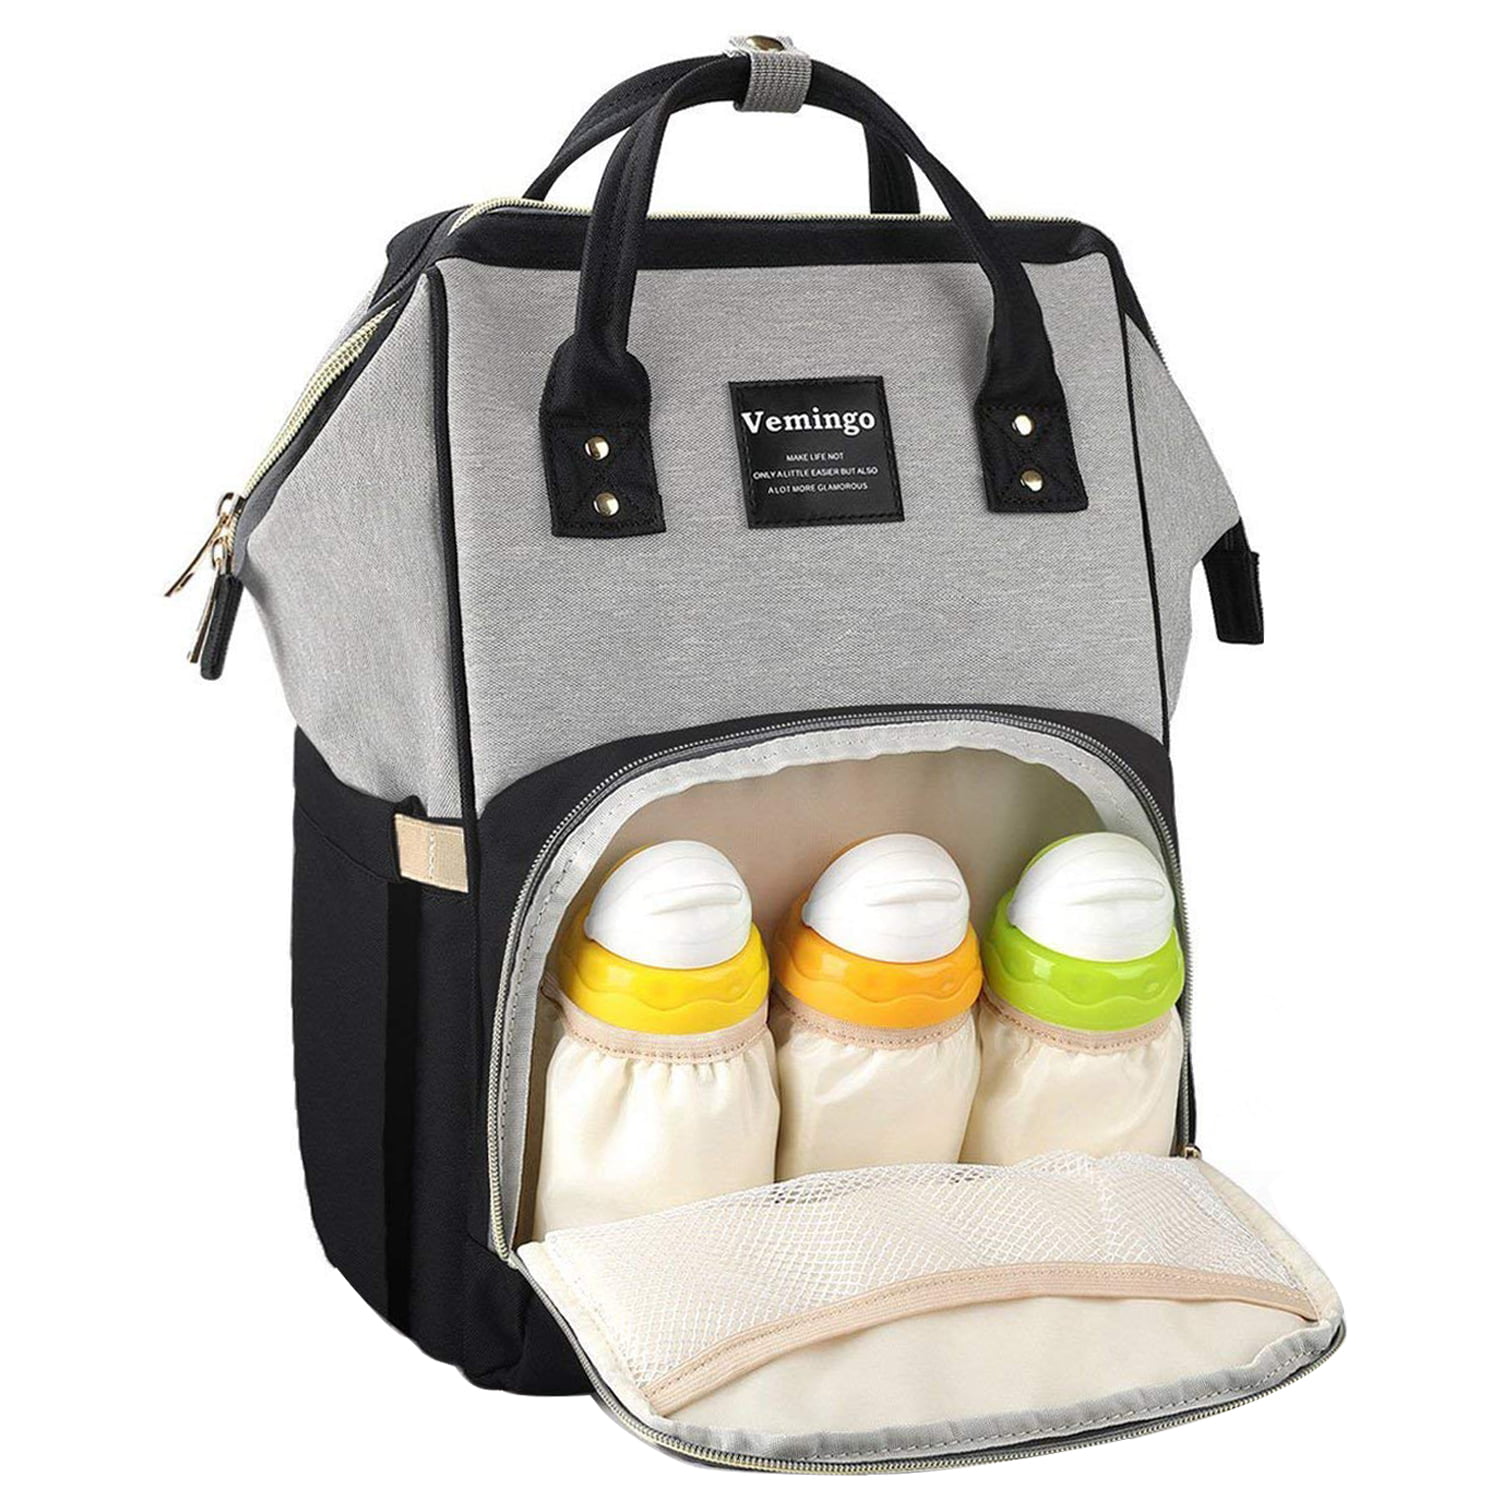 Diaper Bag Organizer Diaper Backpack Set 5 pieces with Stroller Straps Gray 